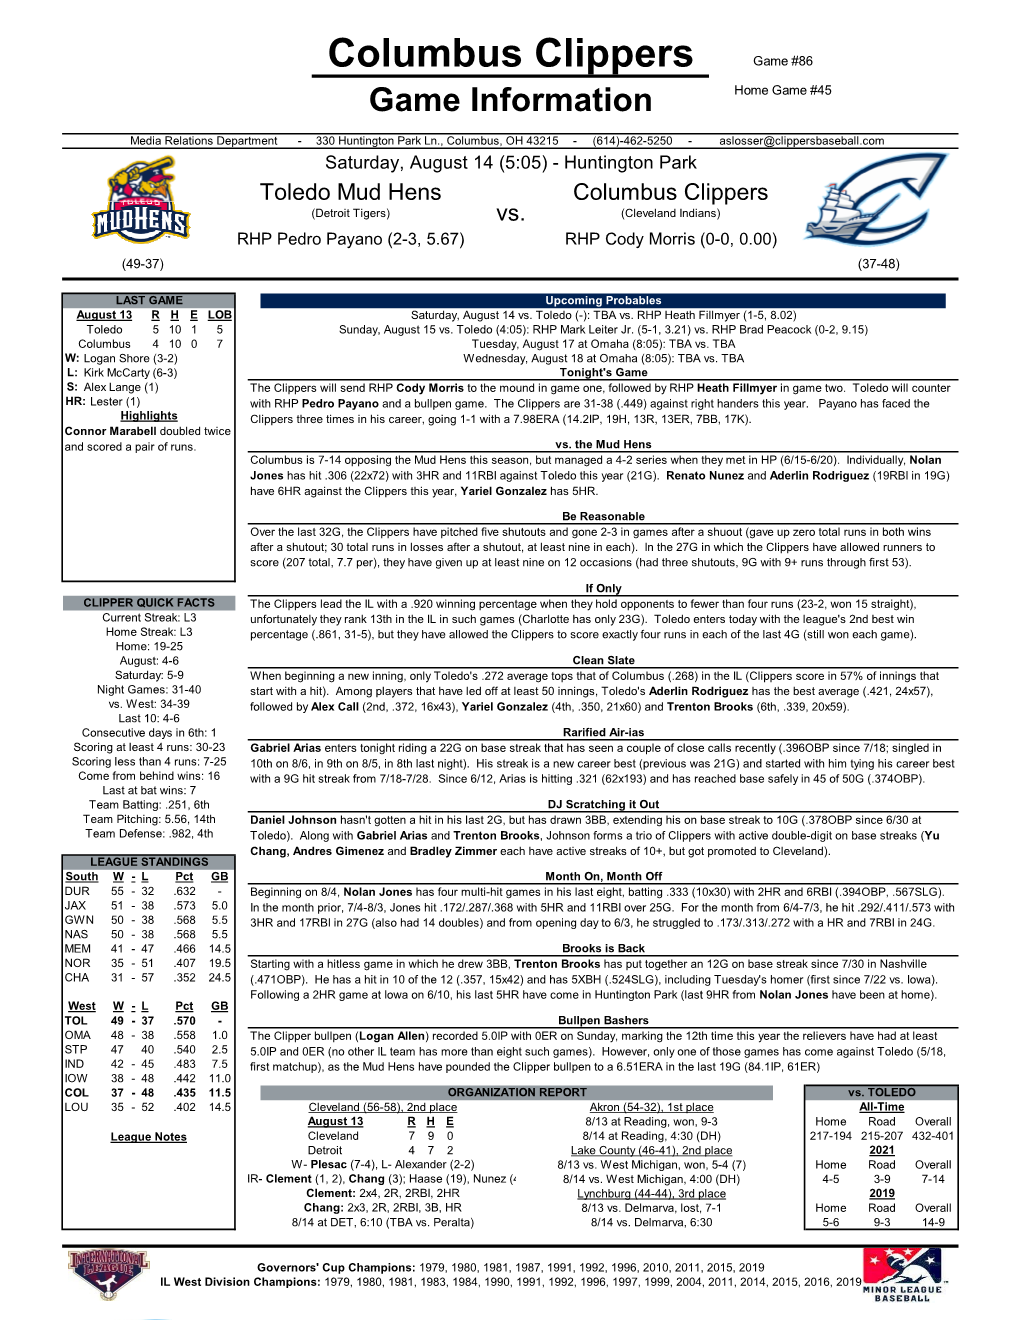 Columbus Clippers Game #86 Game Information Home Game #45